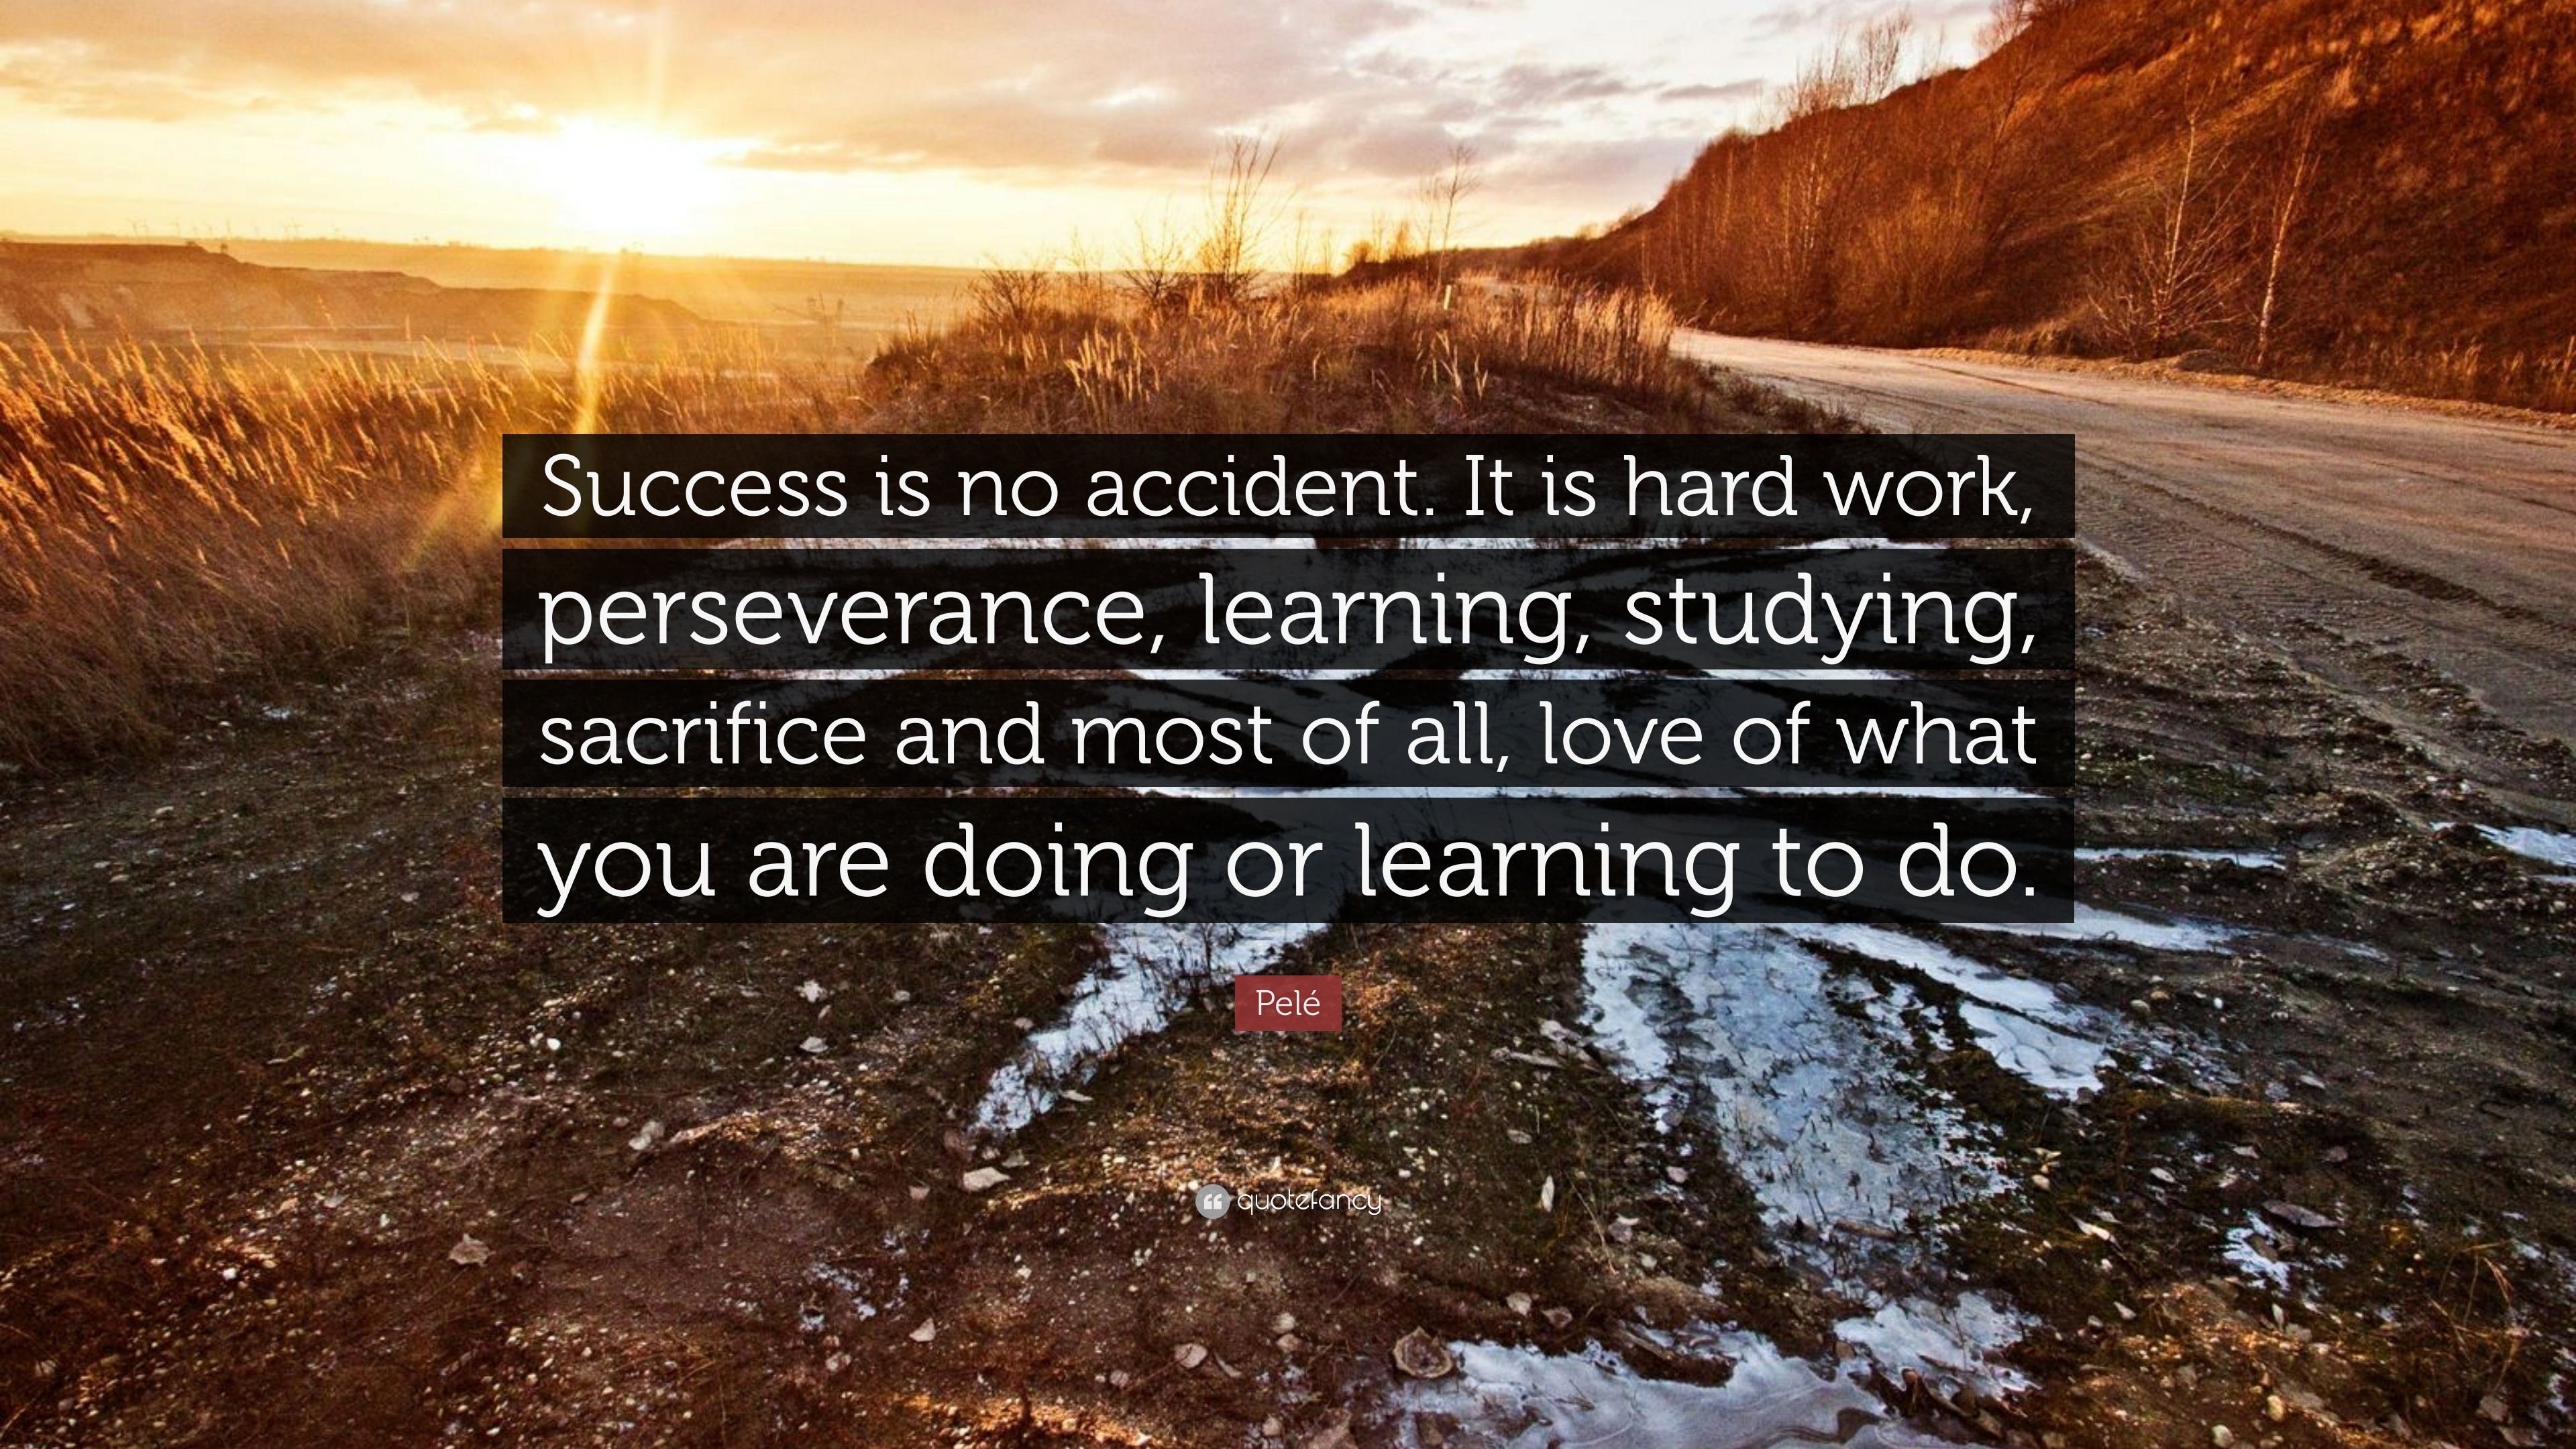 Pelé Quote “Success is no accident. It is hard work